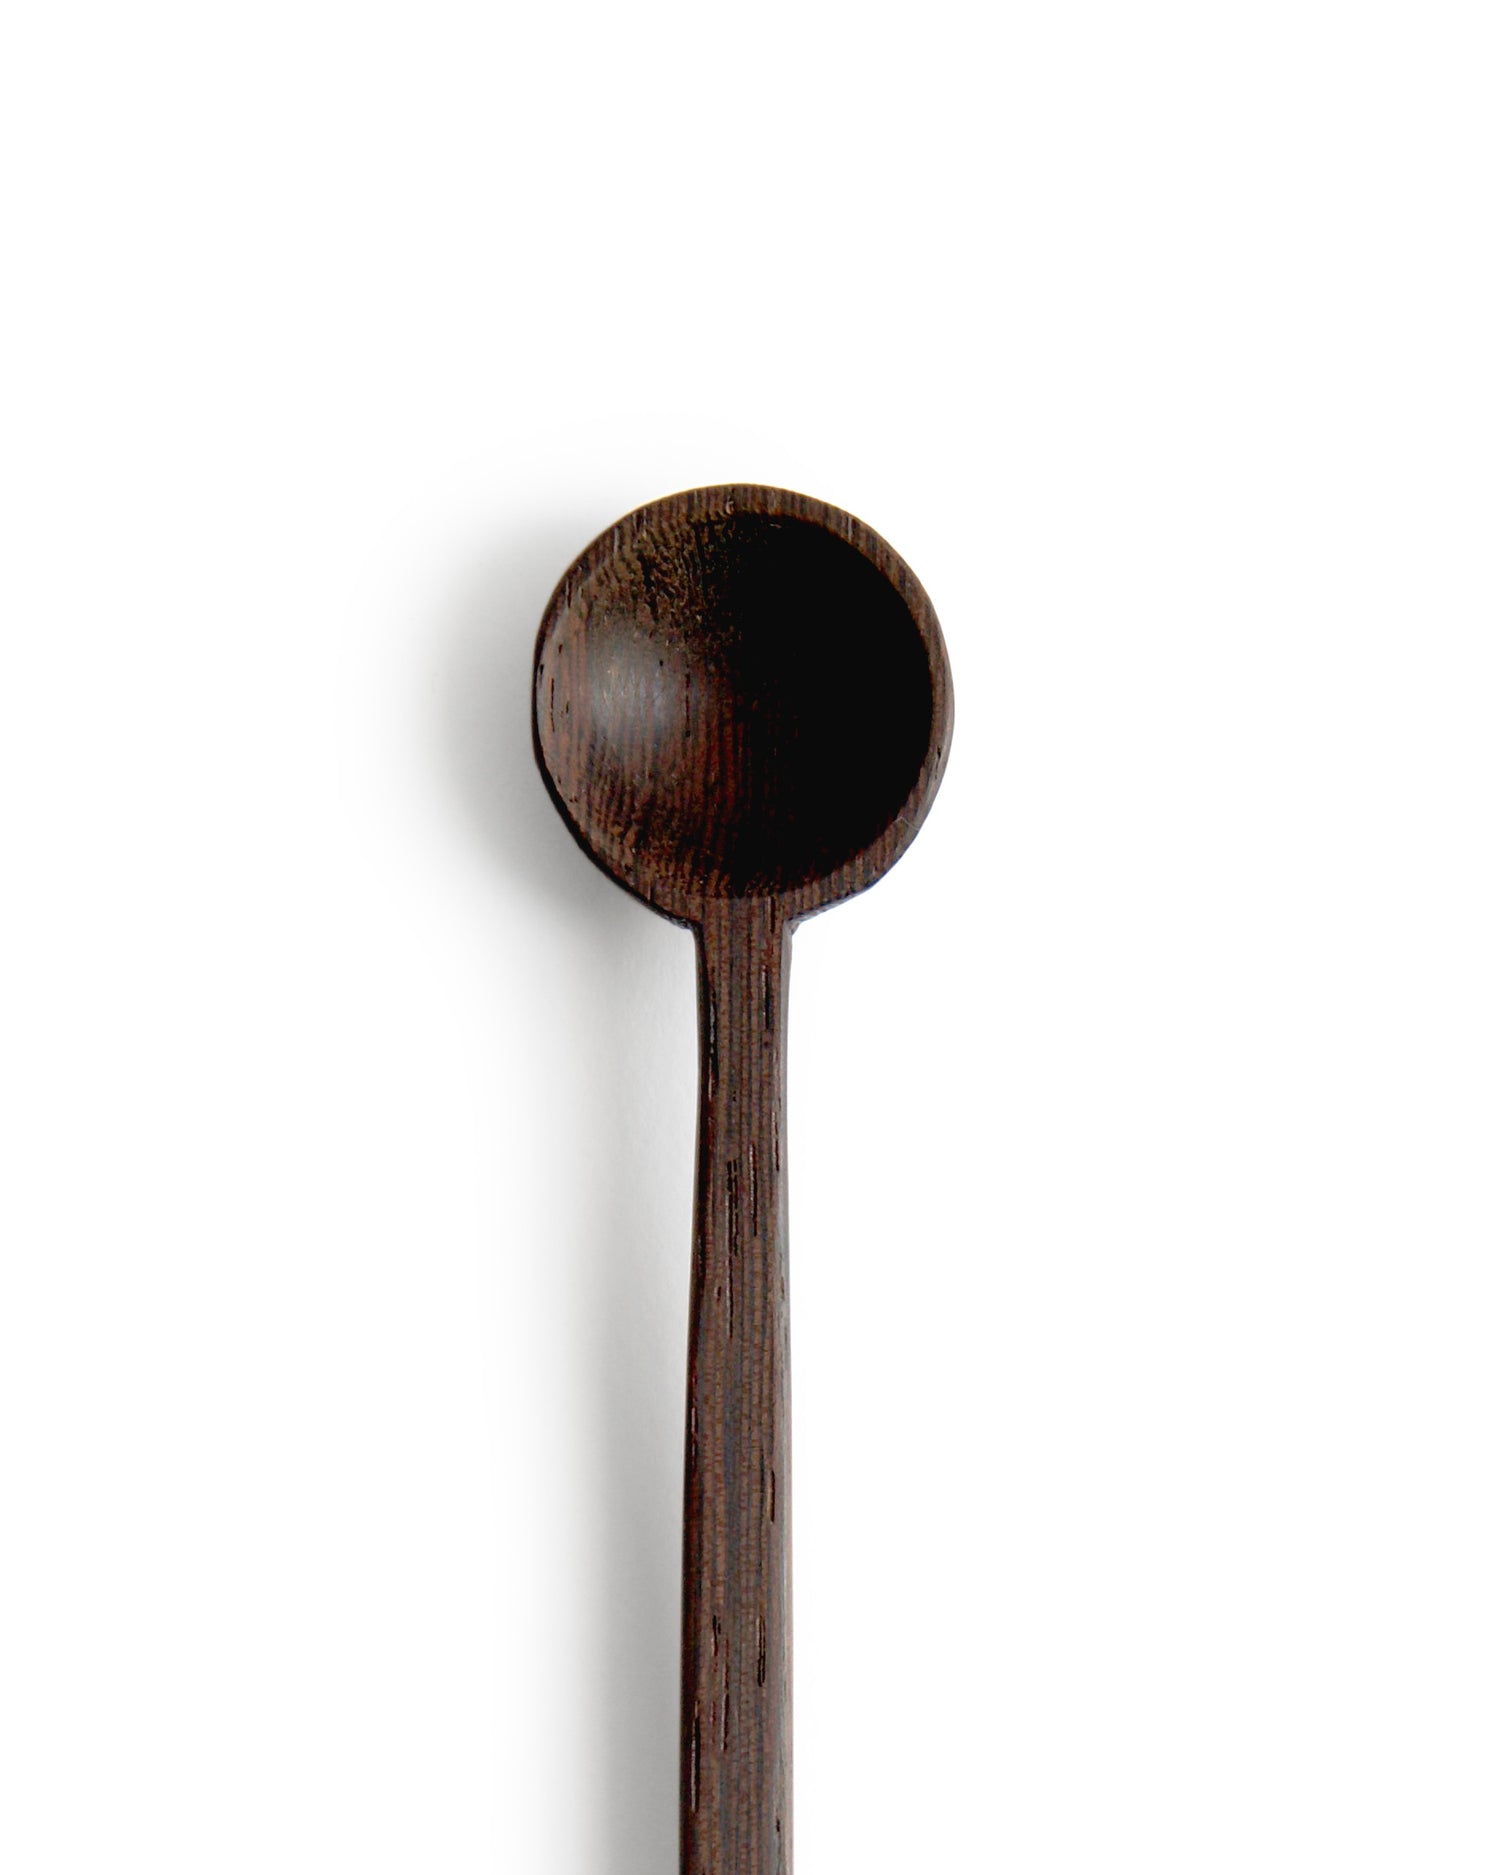 Cropped close-up image of hand carved tagaya wood spoon by Nalata Nalata against white background.